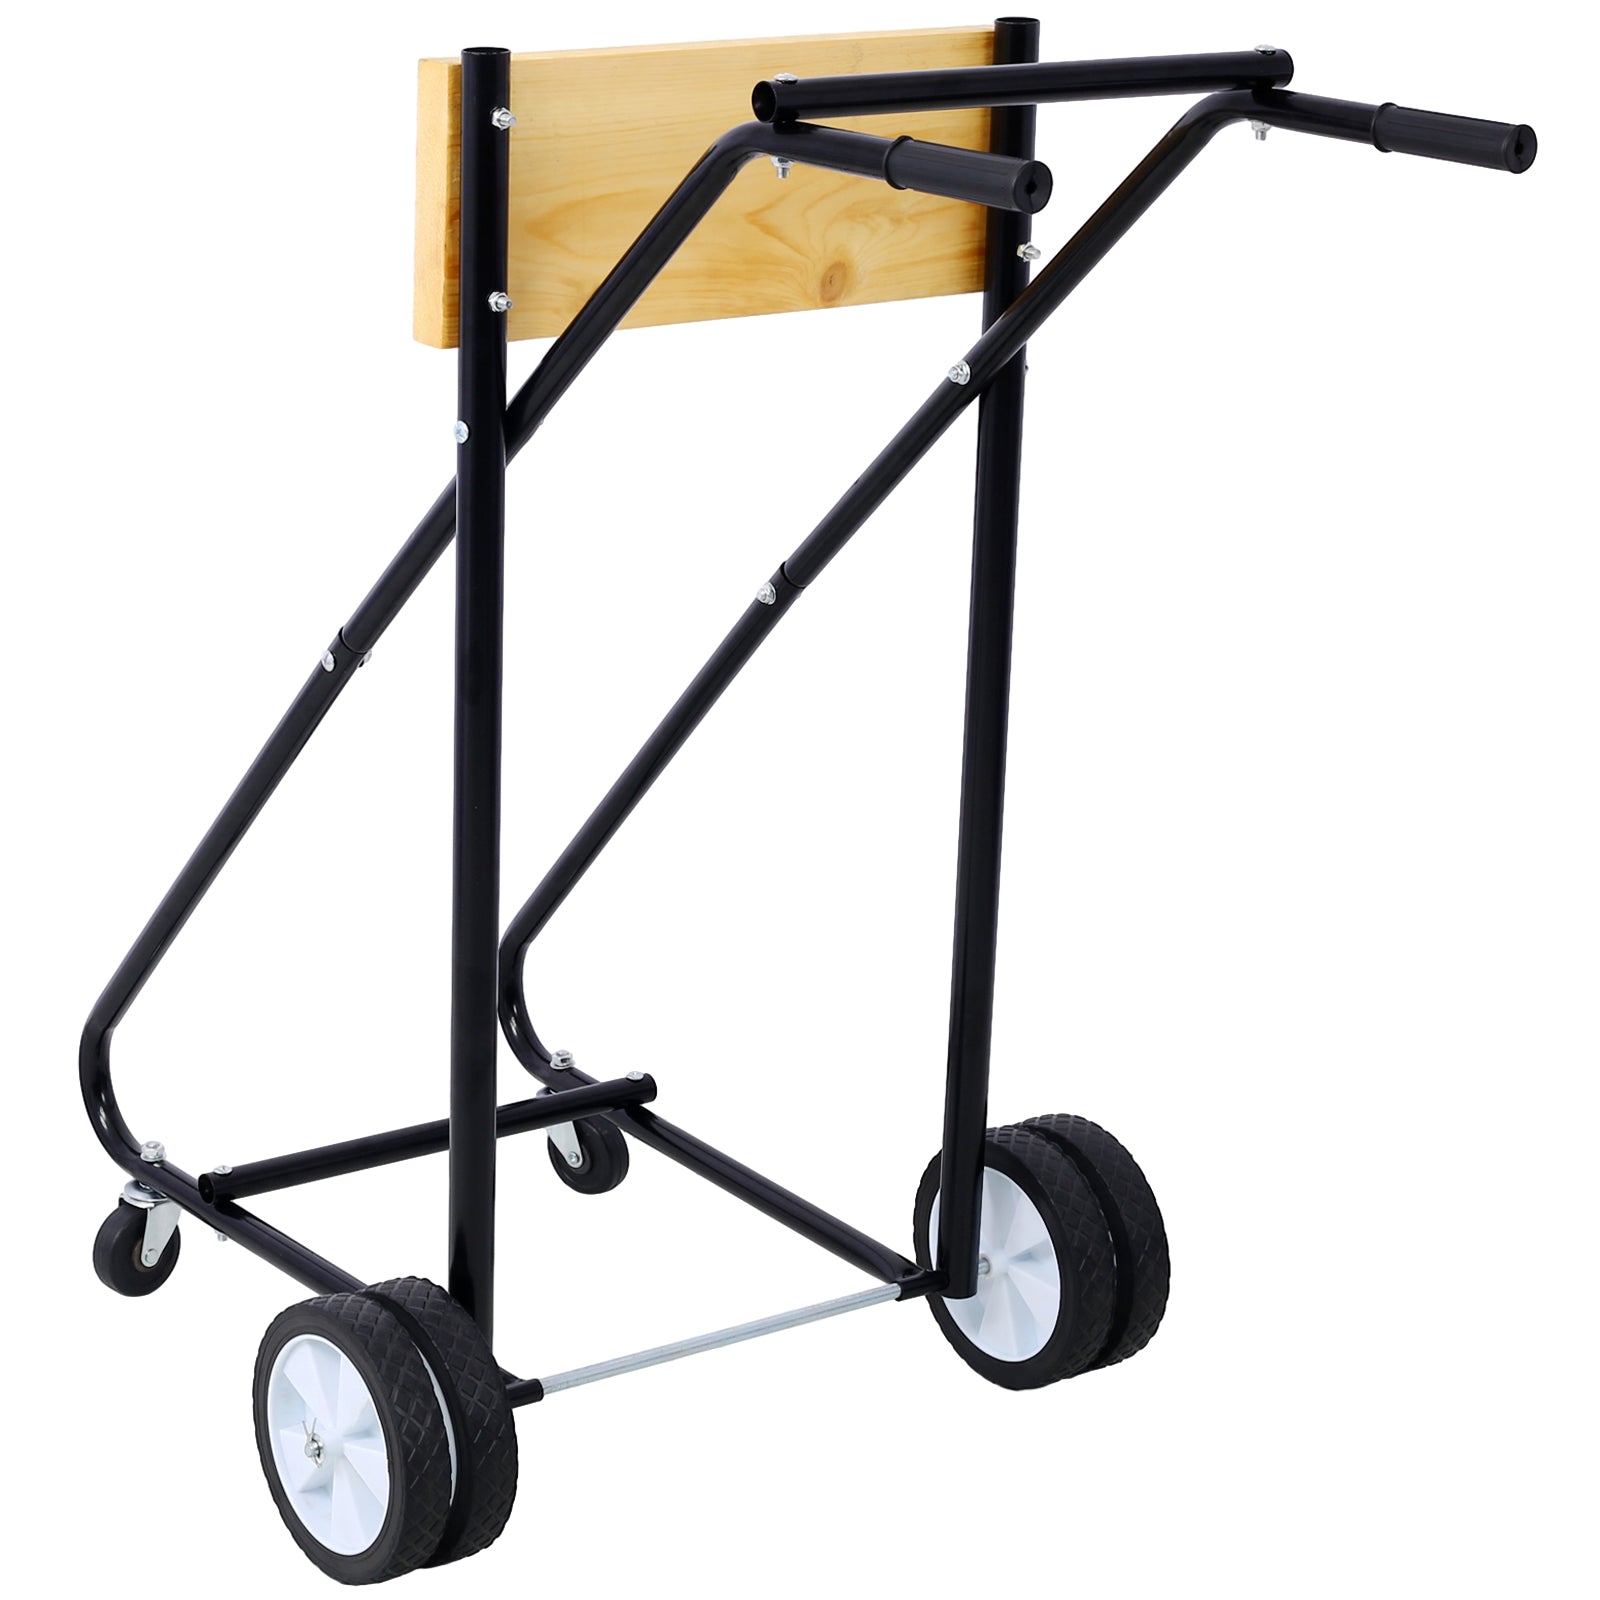 ZNTS Outboard Boat Motor Stand, Engine Carrier Cart Dolly for Storage, 315lbs Weight Capacity, w/Wheels W46565409